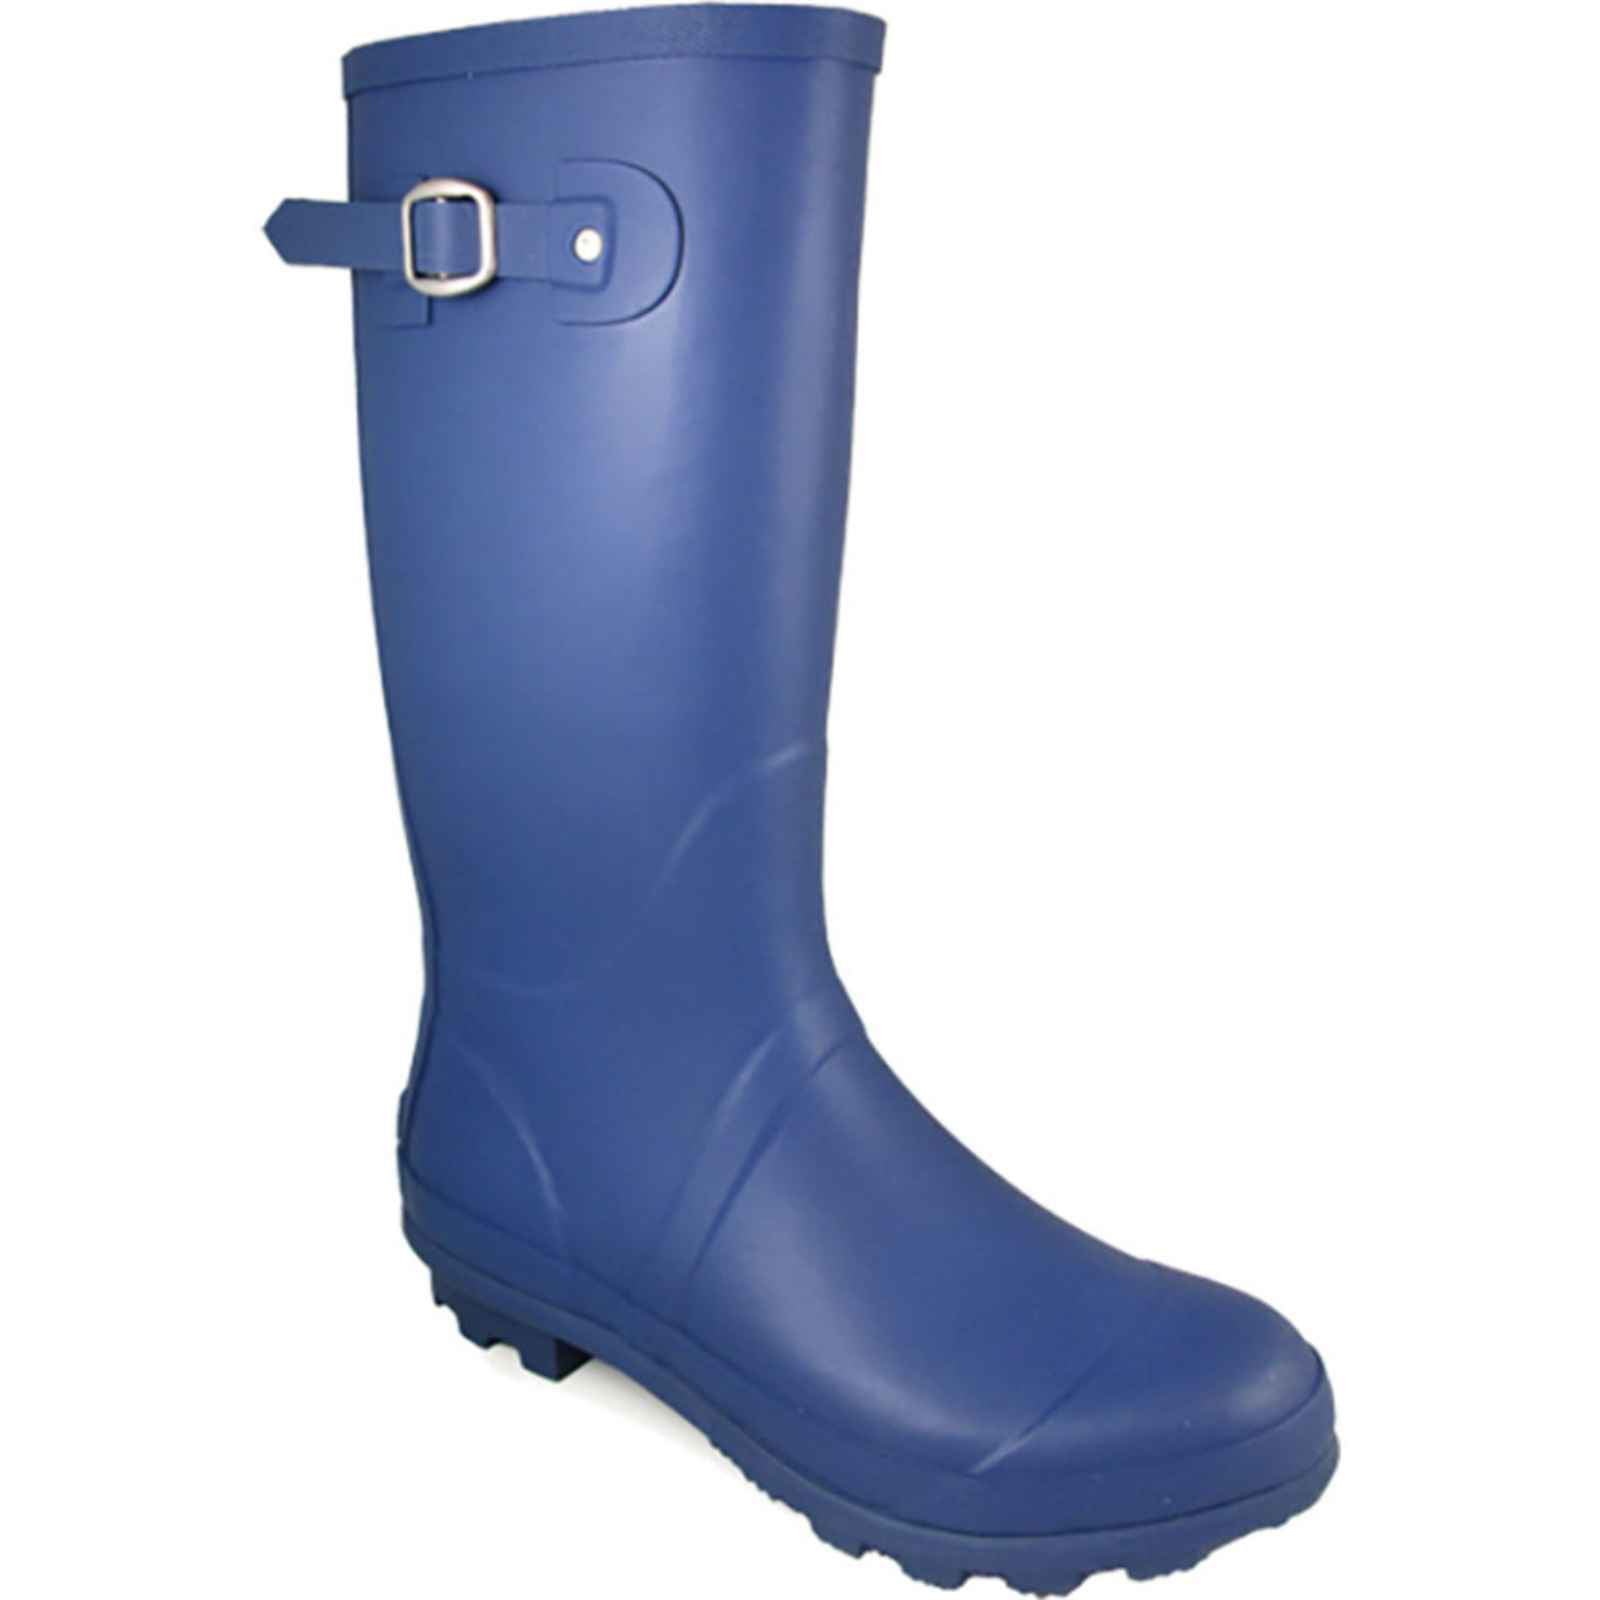 MST-337A Lady Rubber Rain Boot Blue with white foot print woman's Rain Boots 